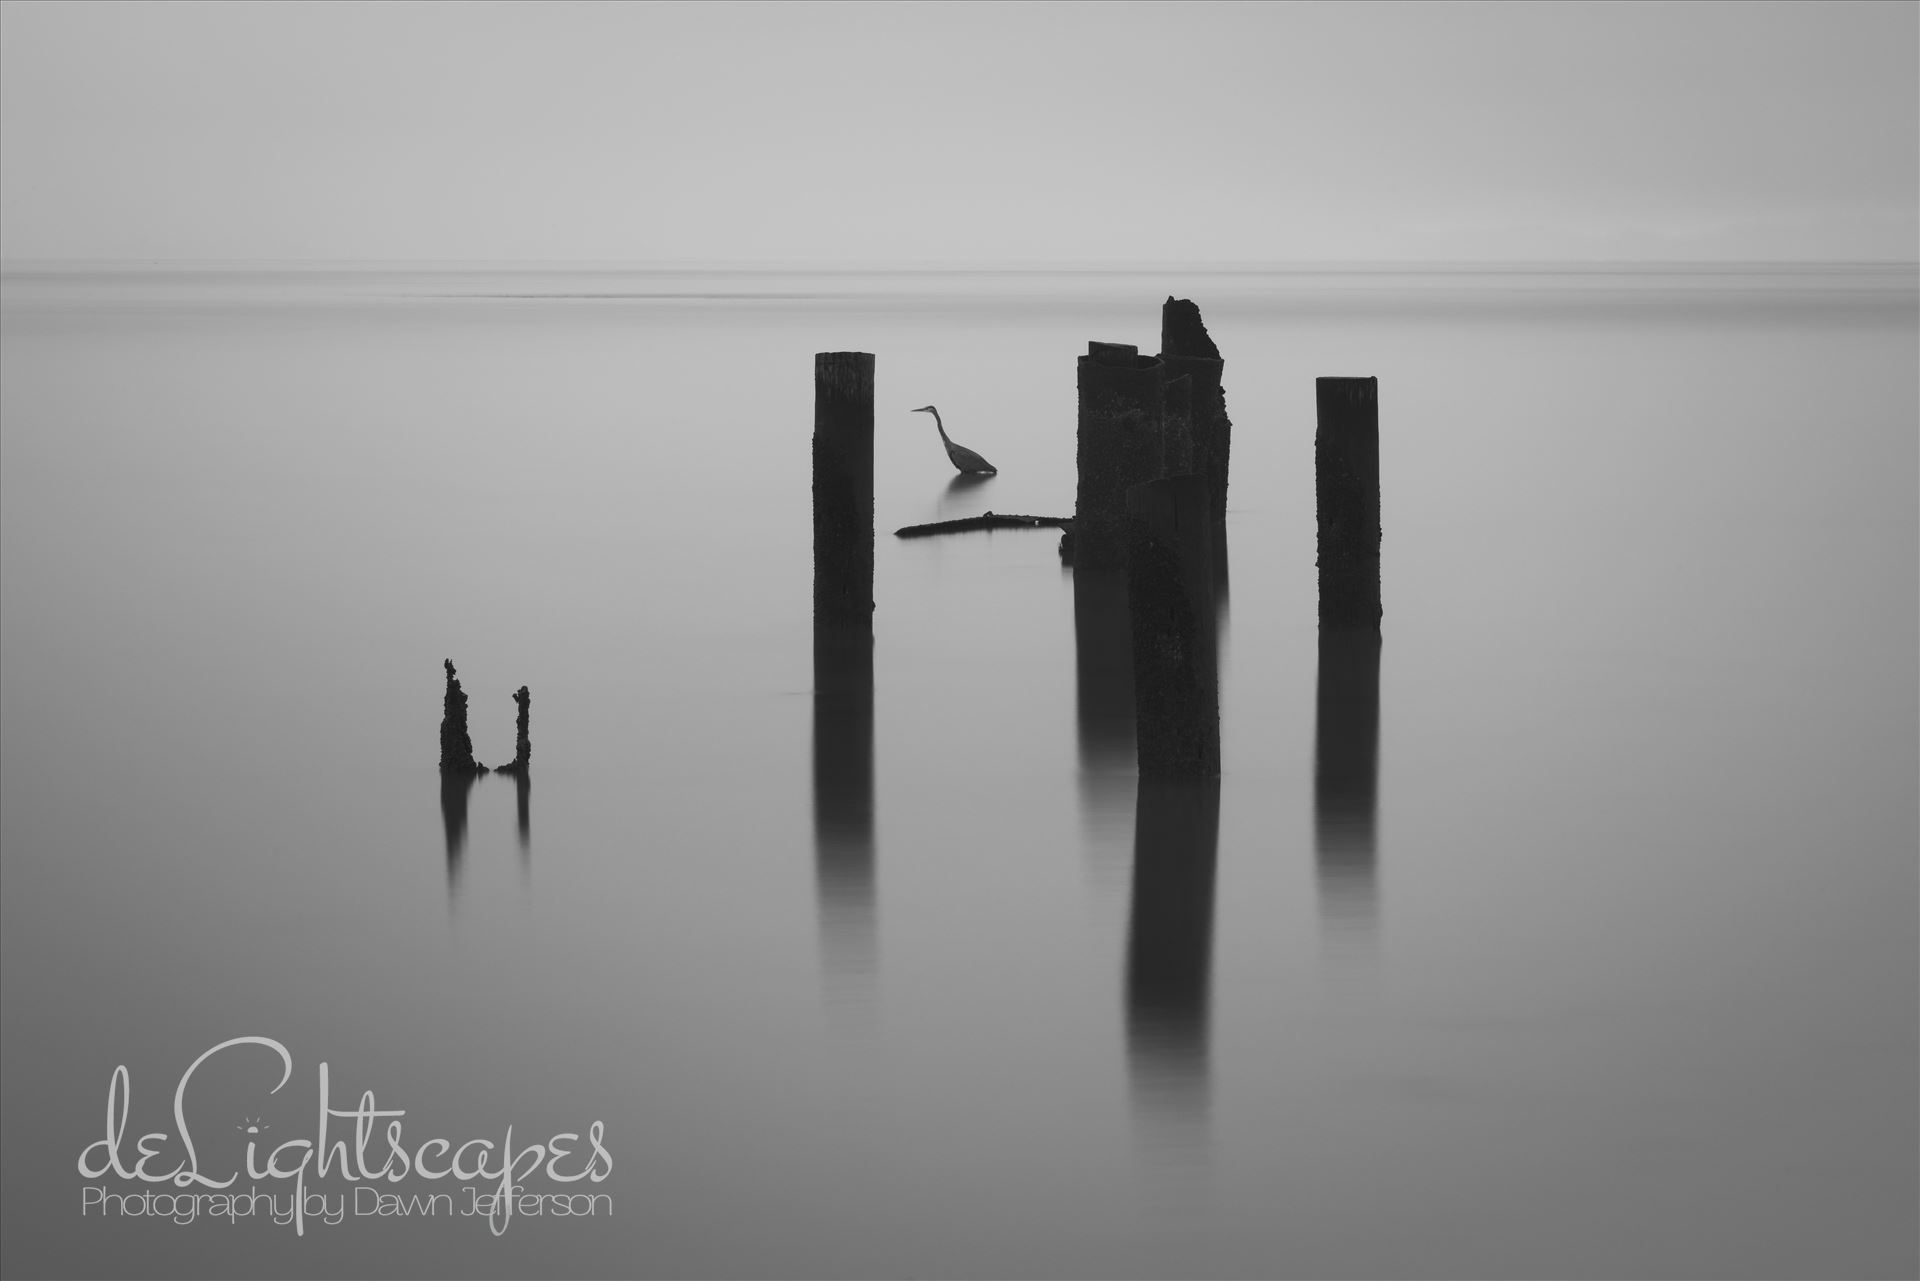 Thirty Seconds of Stillness - This is a thirty second exposure in the which the hunting heron stood completely still focused on his fishing. by Dawn Jefferson